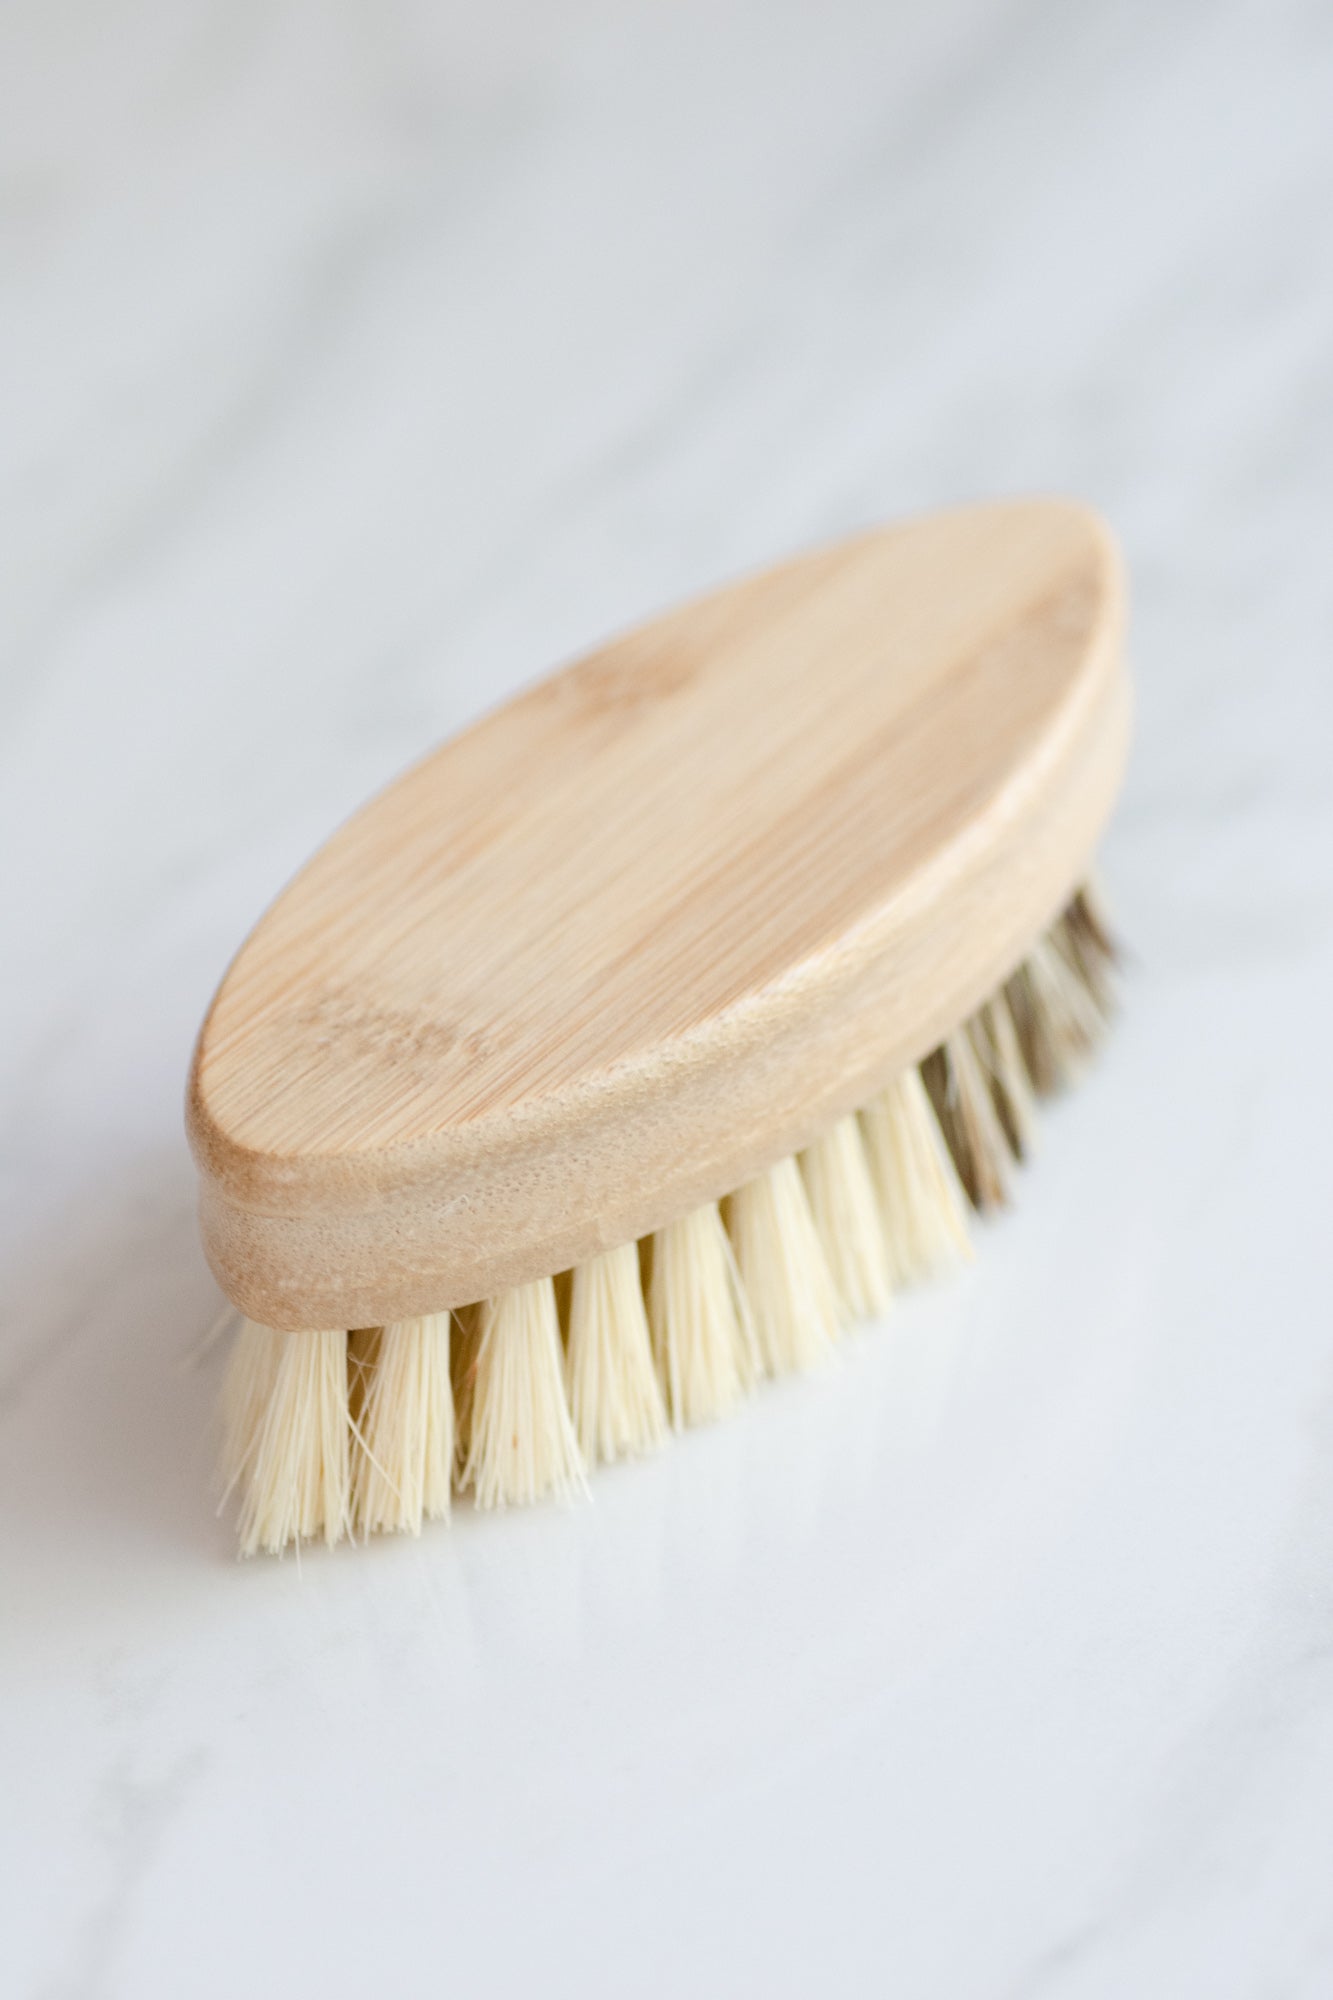 CASA AGAVE® DUO TONE VEGETABLE BRUSH | GENERAL CLEANING - Case of 12